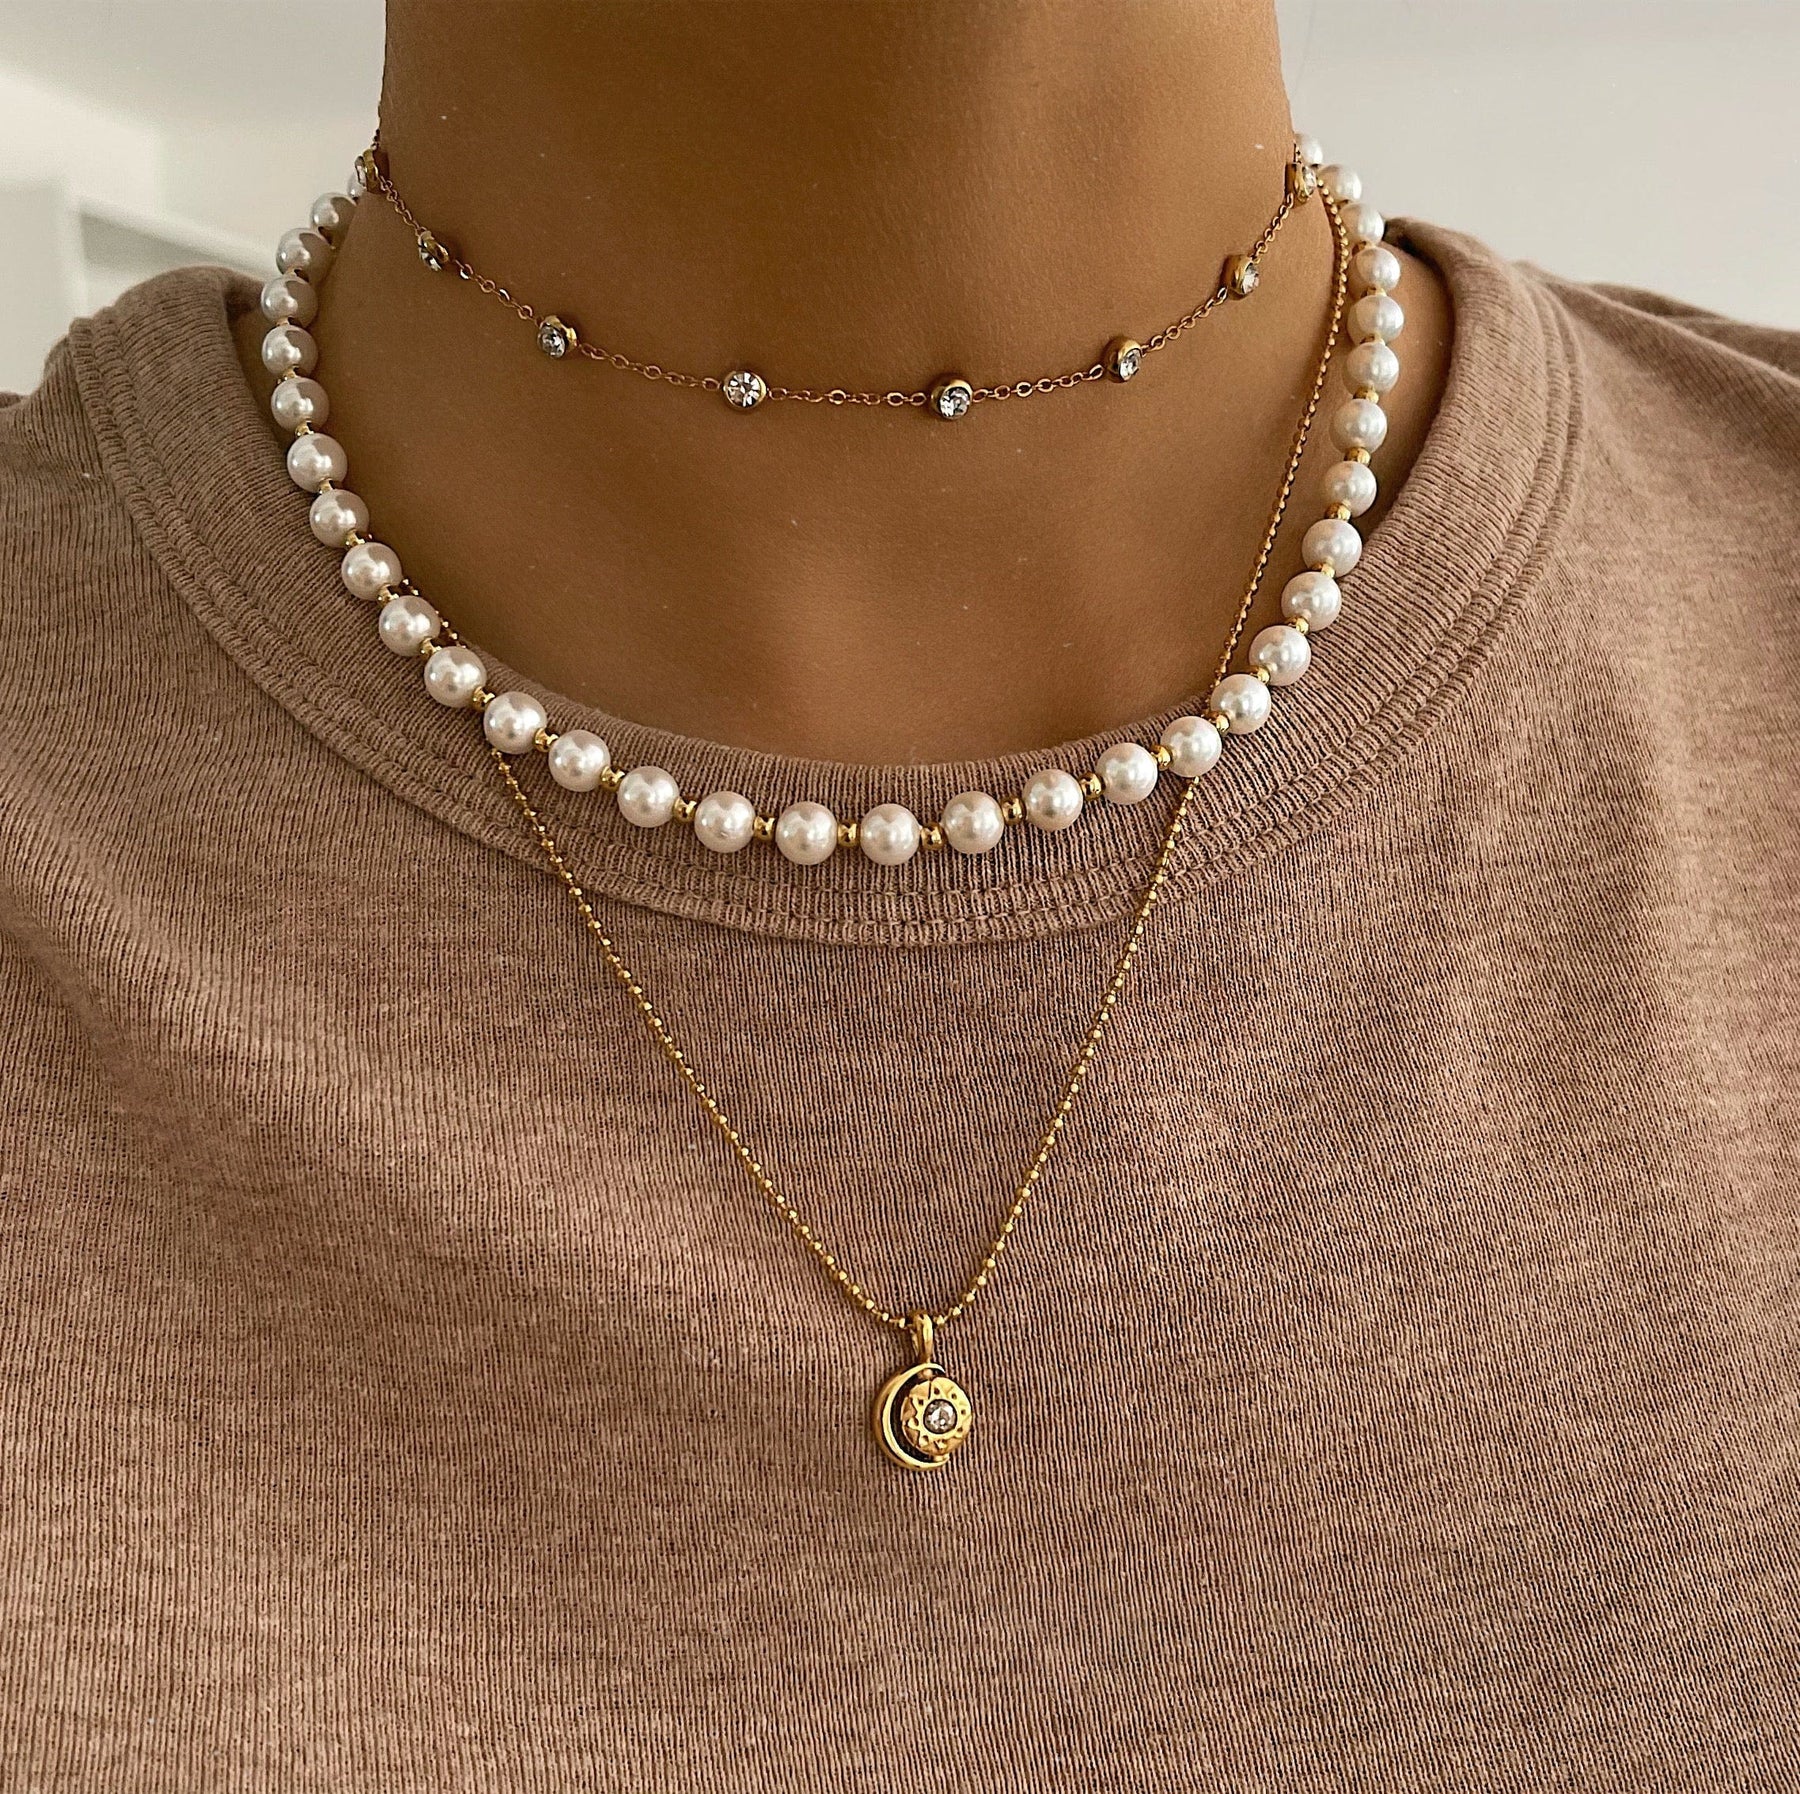 BohoMoon Stainless Steel Macy Pearl Necklace